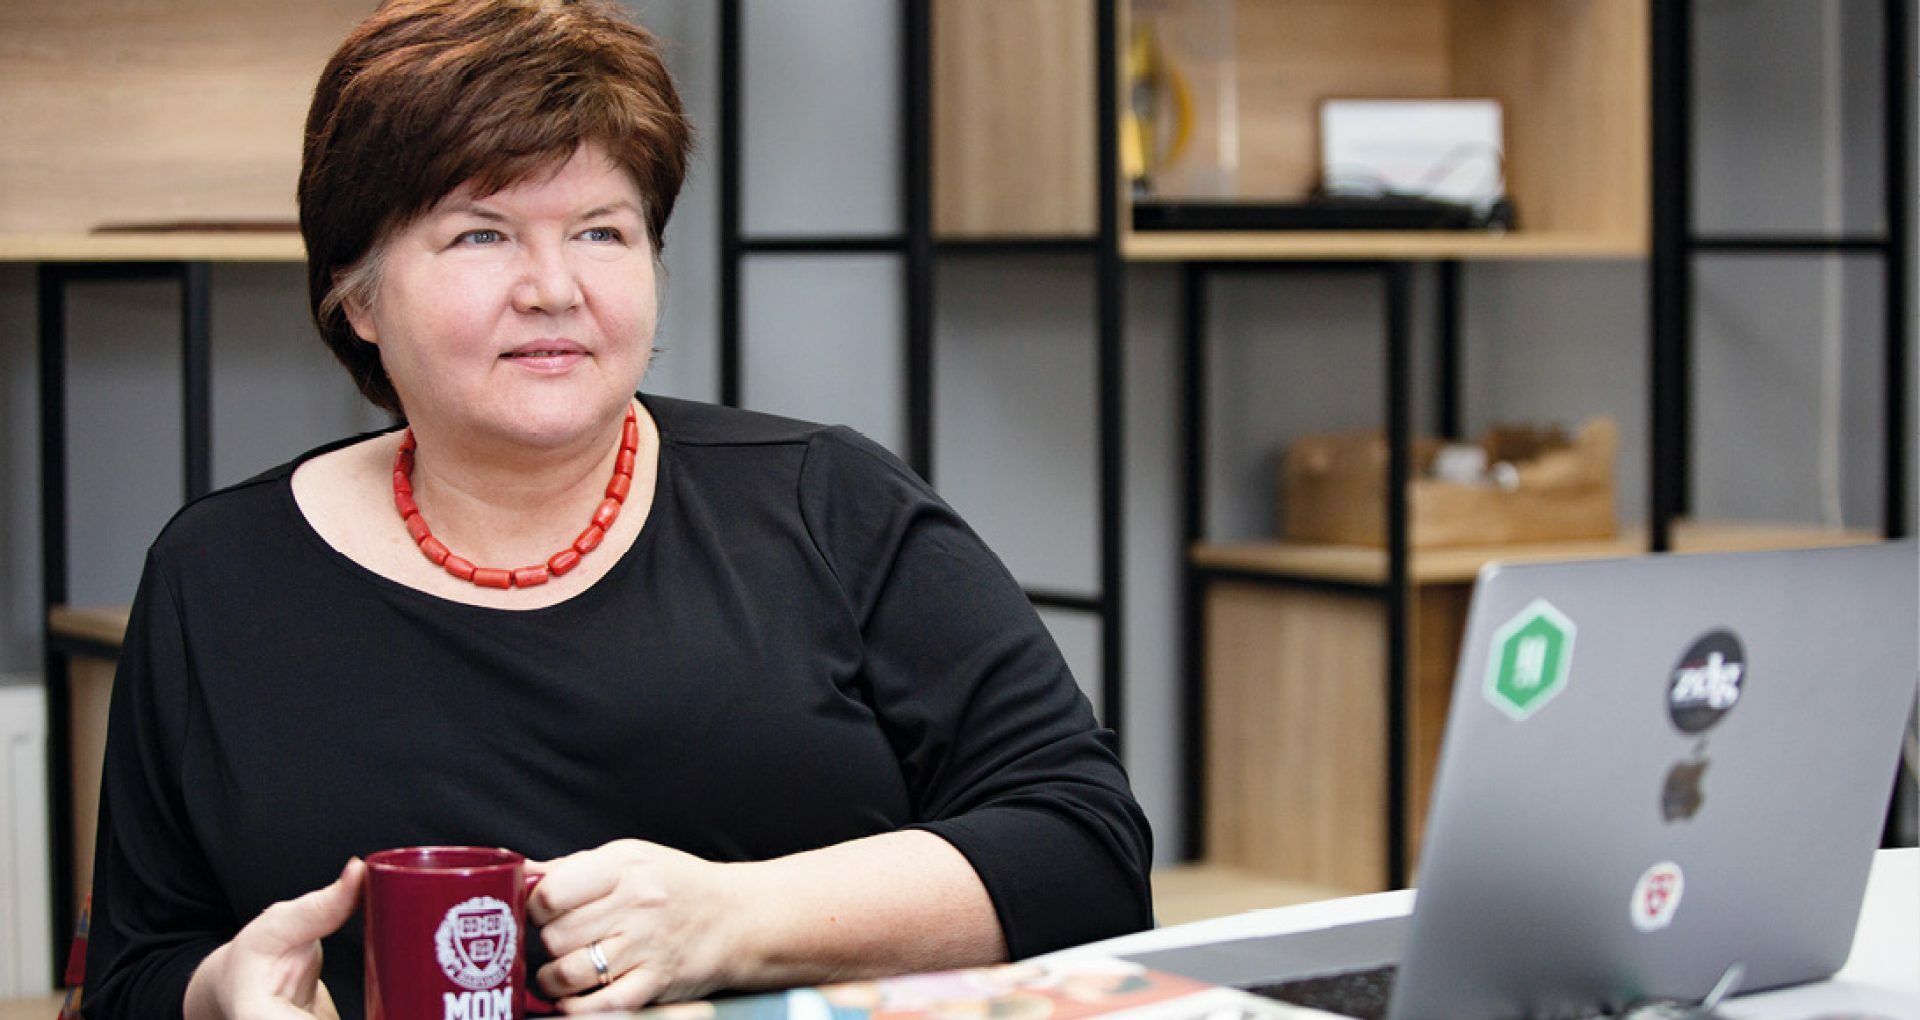 INTERVIEW: On Guard on the Prut – the Shadow of Russia and the Free Press in Moldova. An Interview with the ZdG Director, Alina Radu